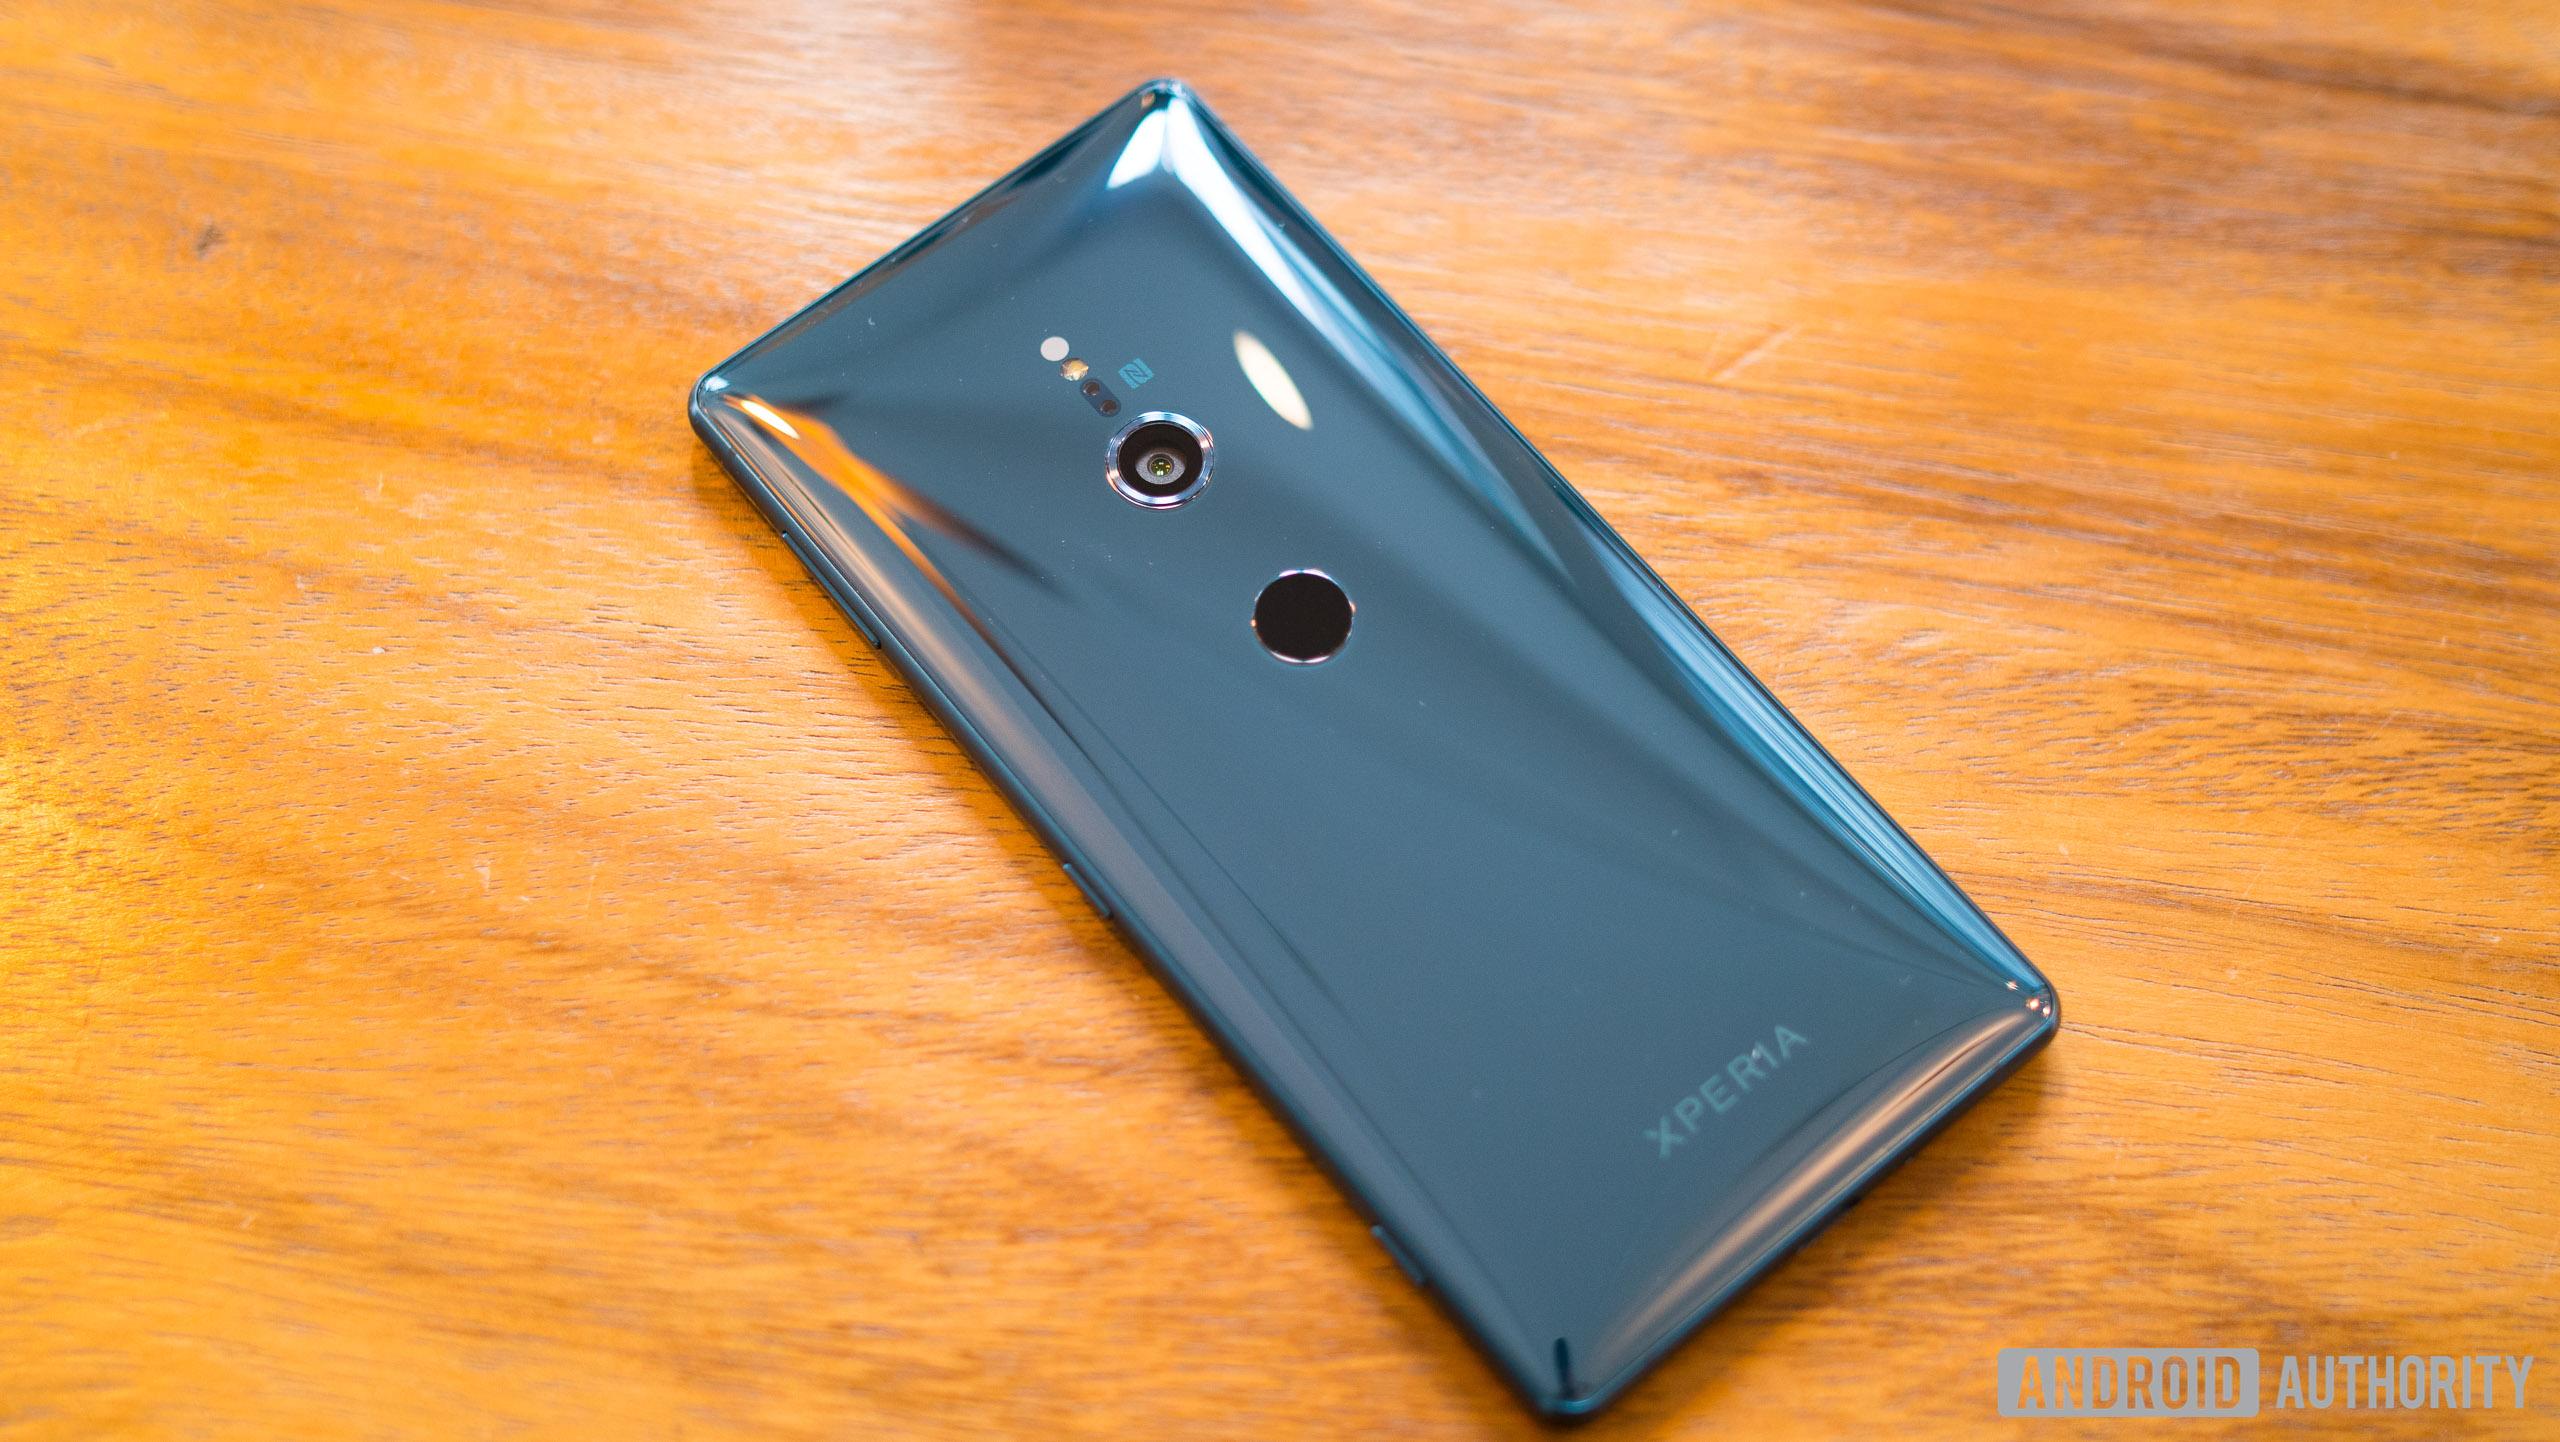 This is why Sony ditched the Xperia XZ2/XZ2 Compact headphone jack